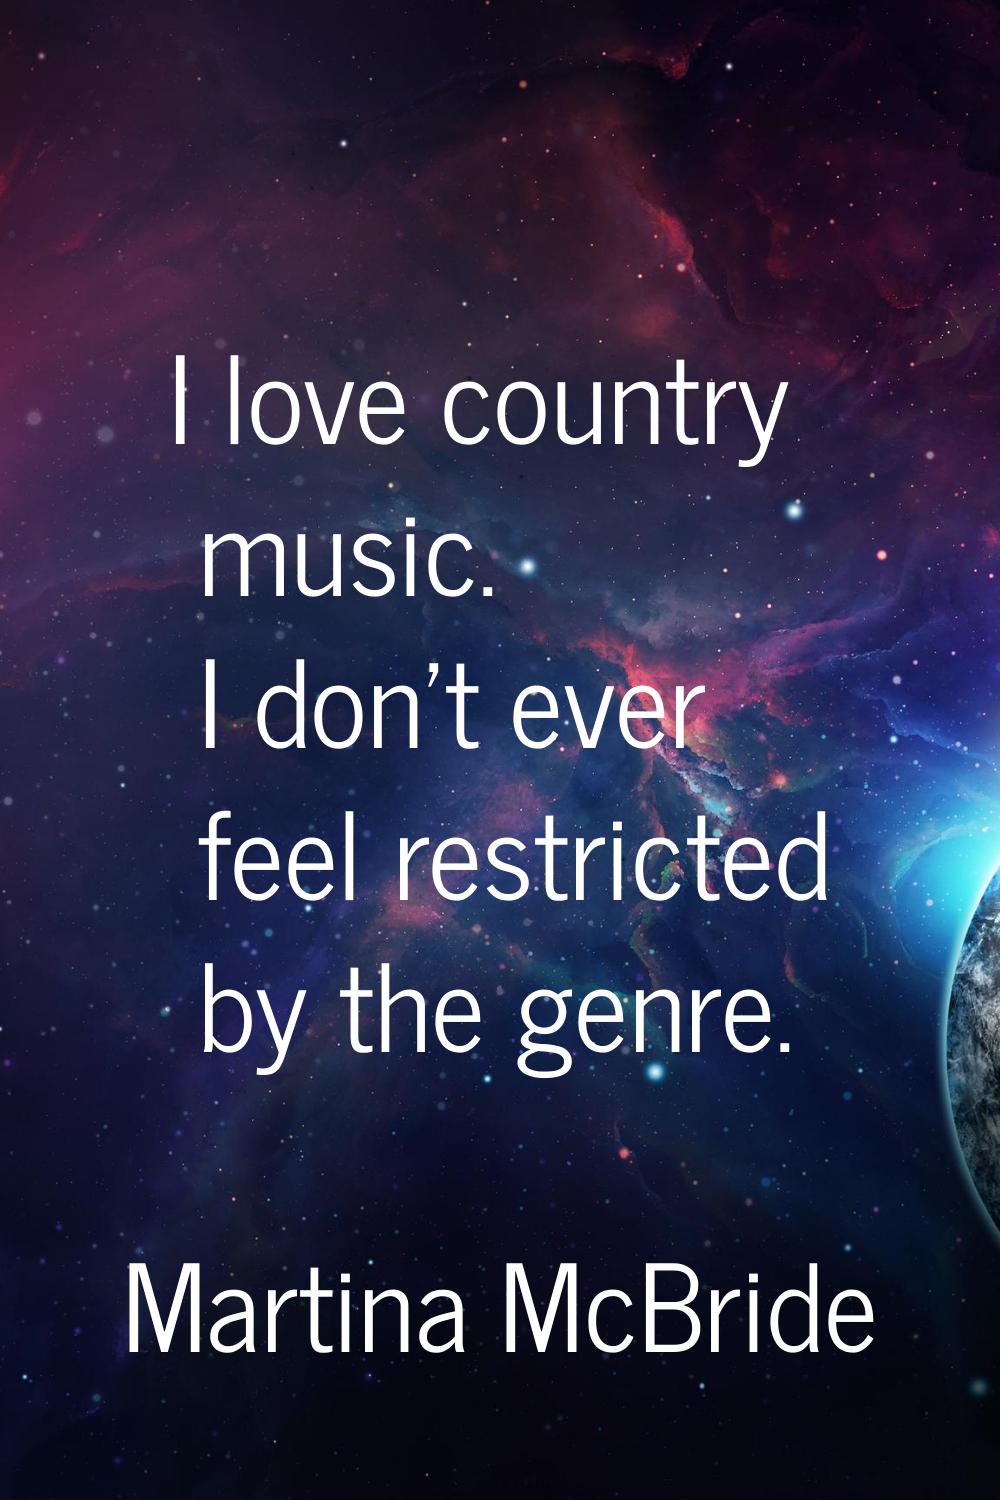 I love country music. I don't ever feel restricted by the genre.